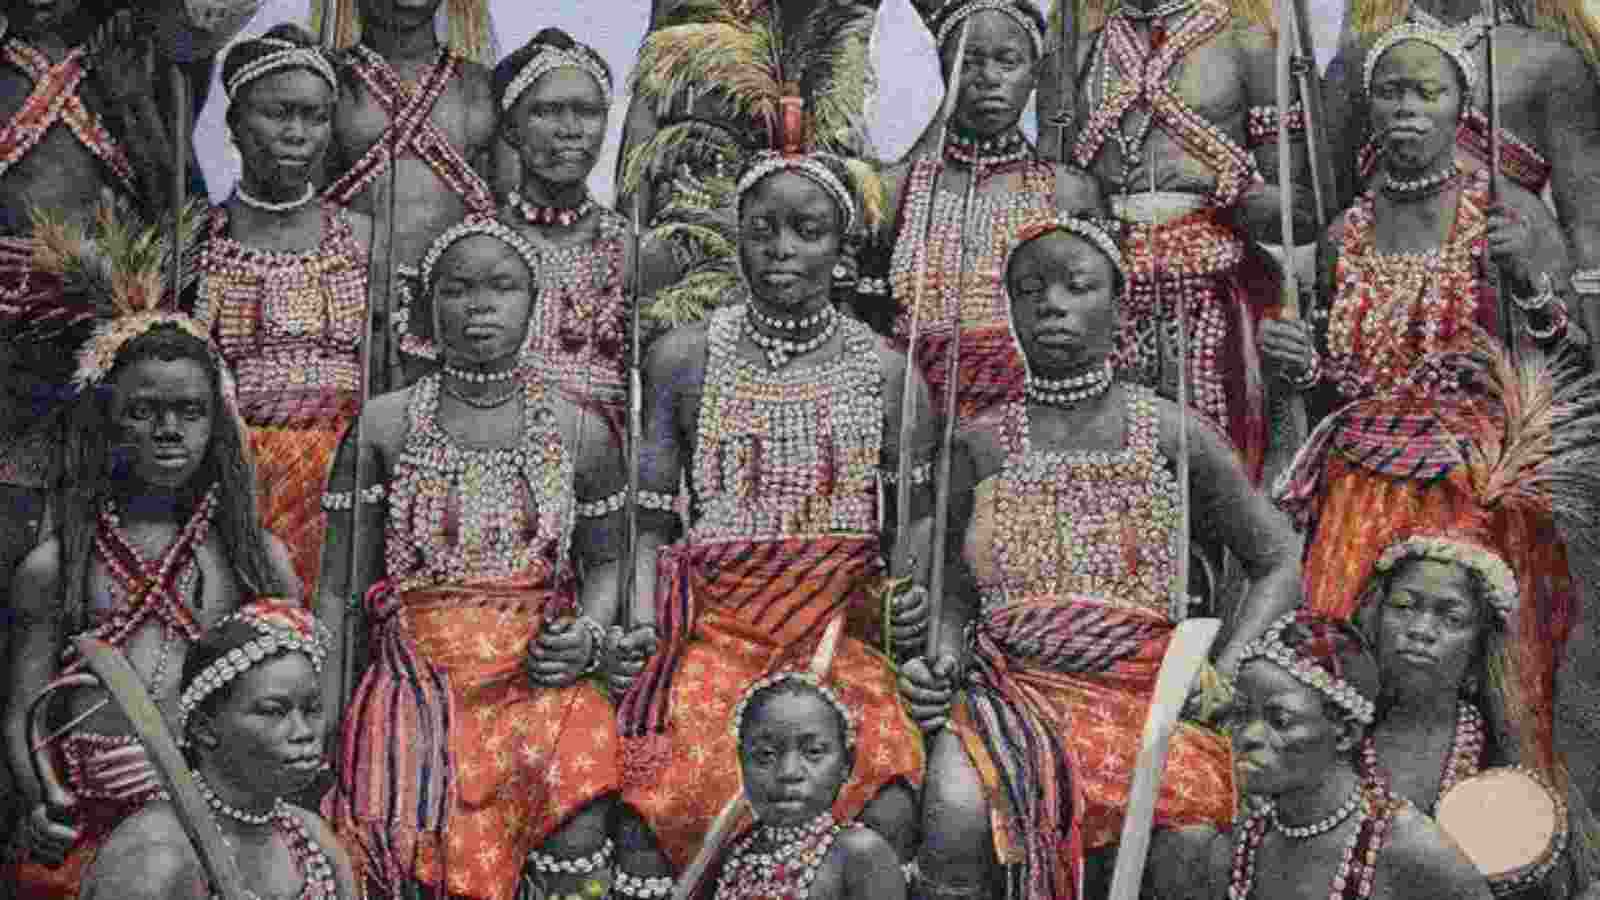 The true story of the Dahomey Kingdom warriors is coming as a movie 'The Woman King'